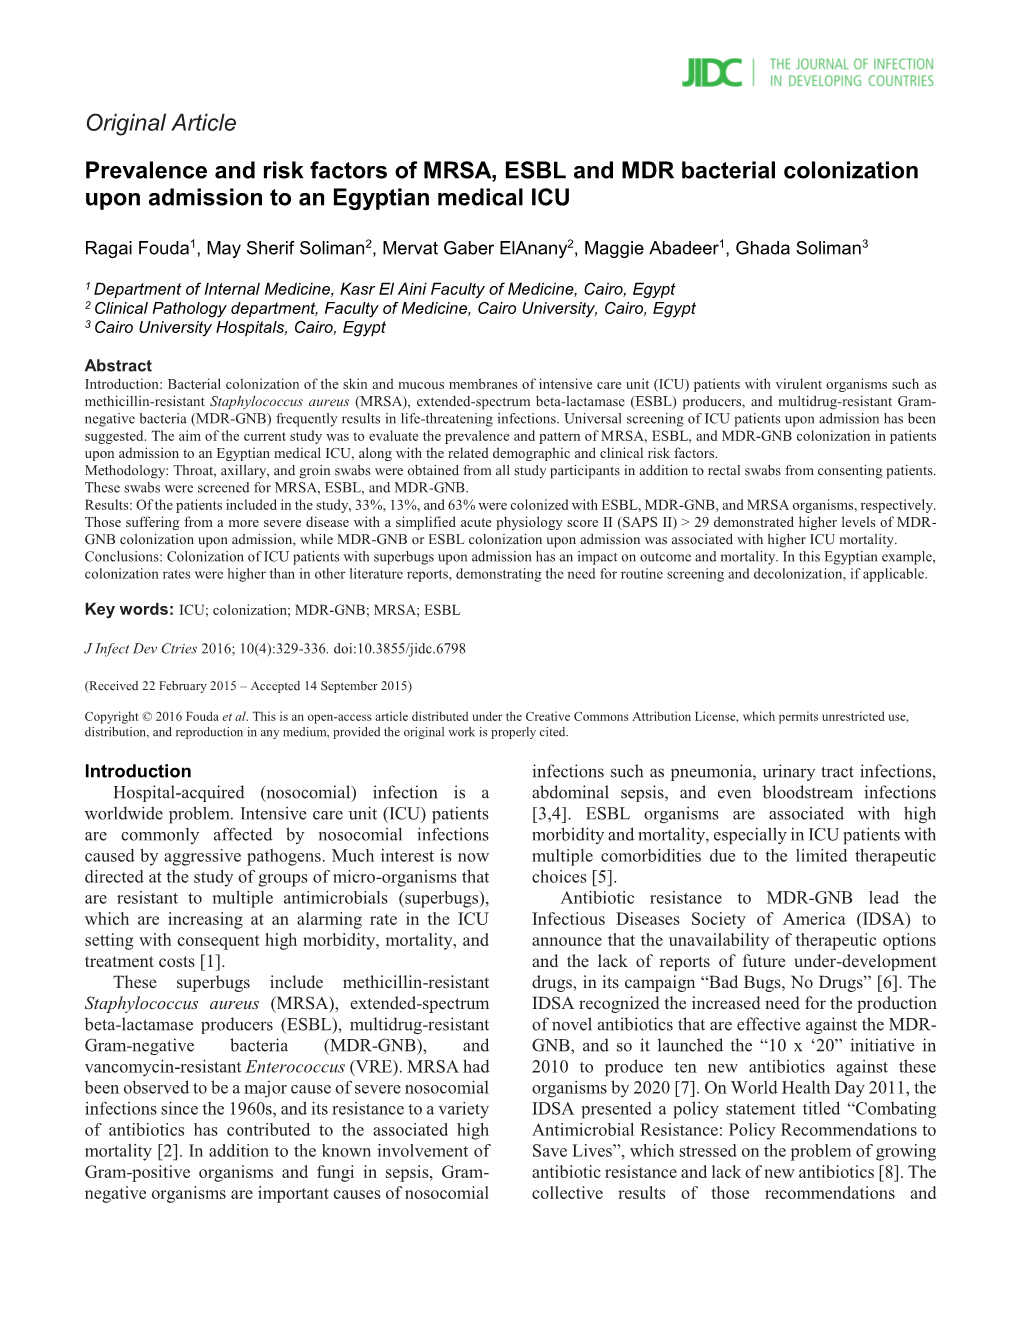 Prevalence and Risk Factors of MRSA, ESBL and MDR Bacterial Colonization Upon Admission to an Egyptian Medical ICU